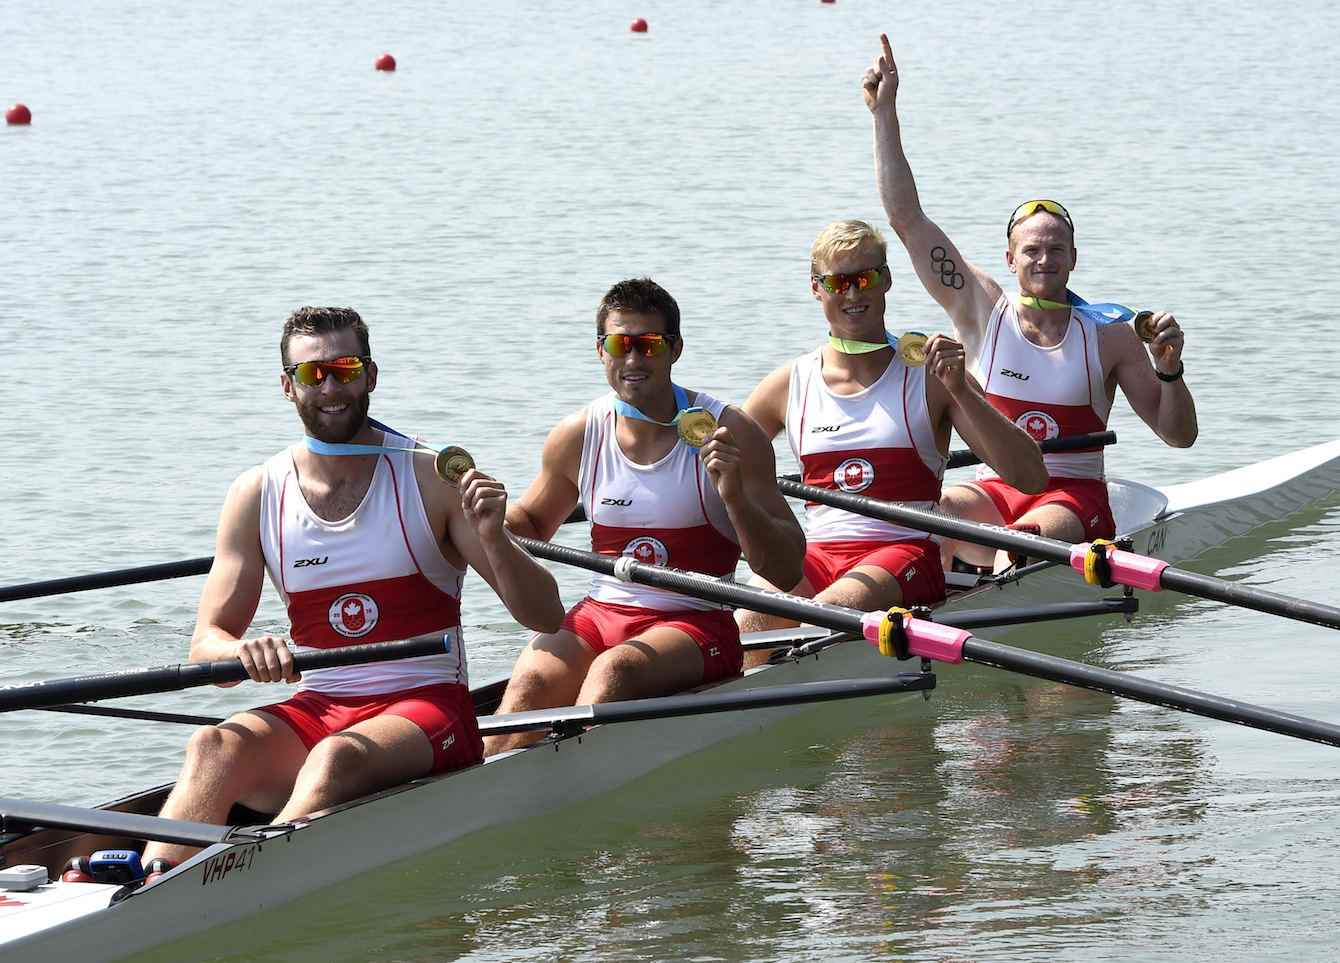 The men’s coxless four crew (Will Crothers, Kai Langerfeld, Conlin McCabe and Tim Schrijver) rowed to gold at Toronto 2015 Pan American Games. 